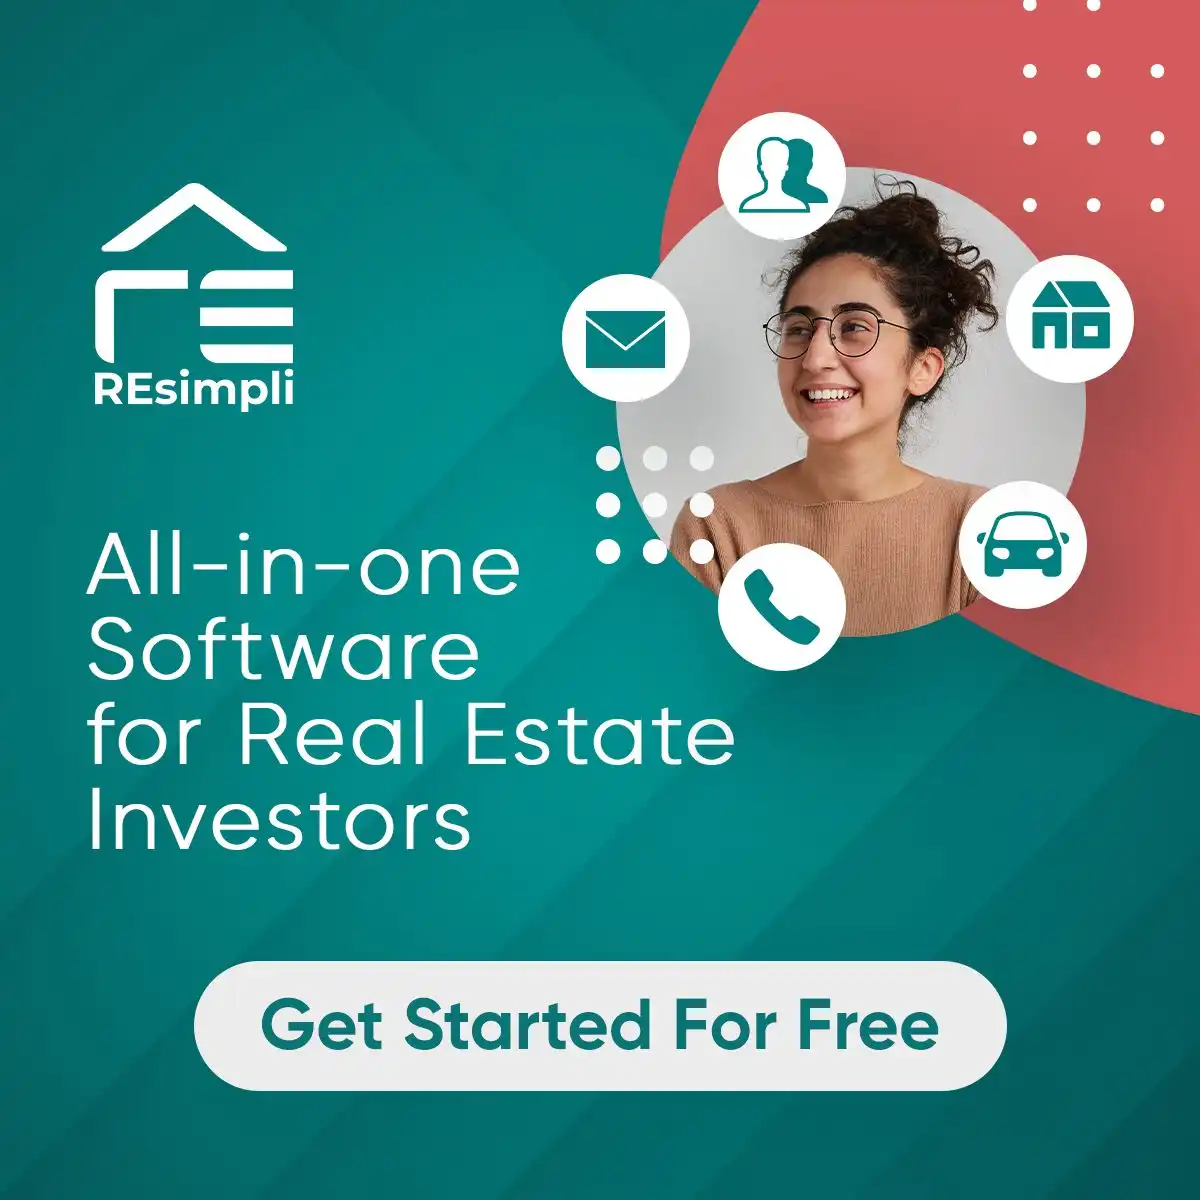 Start Your Free 14-Day REsimpli Trial